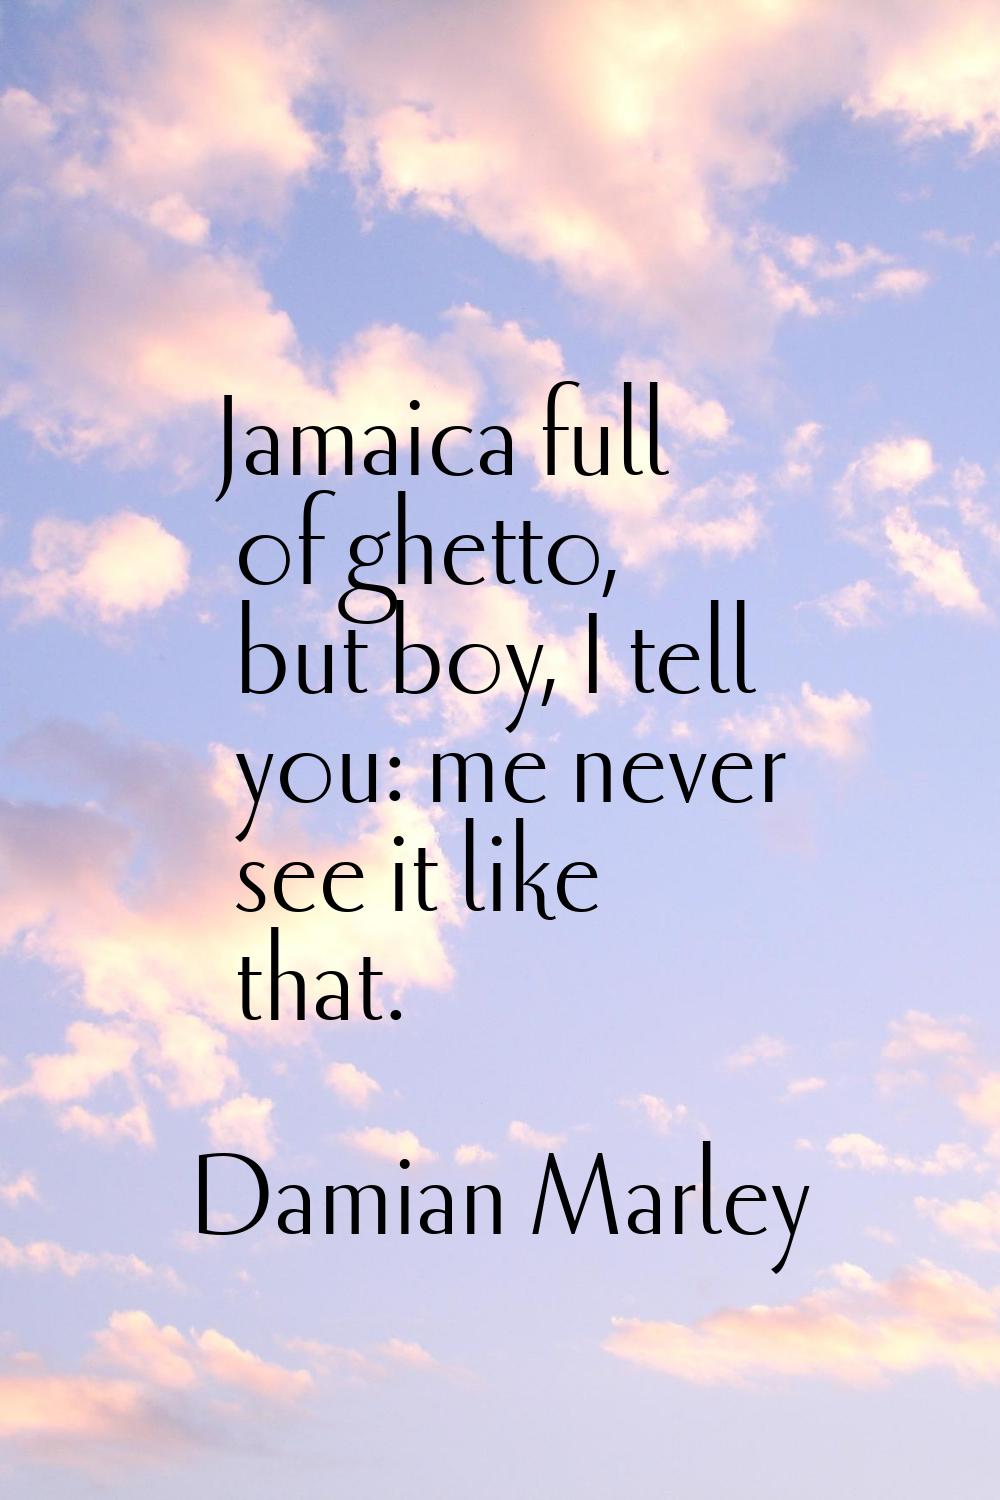 Jamaica full of ghetto, but boy, I tell you: me never see it like that.